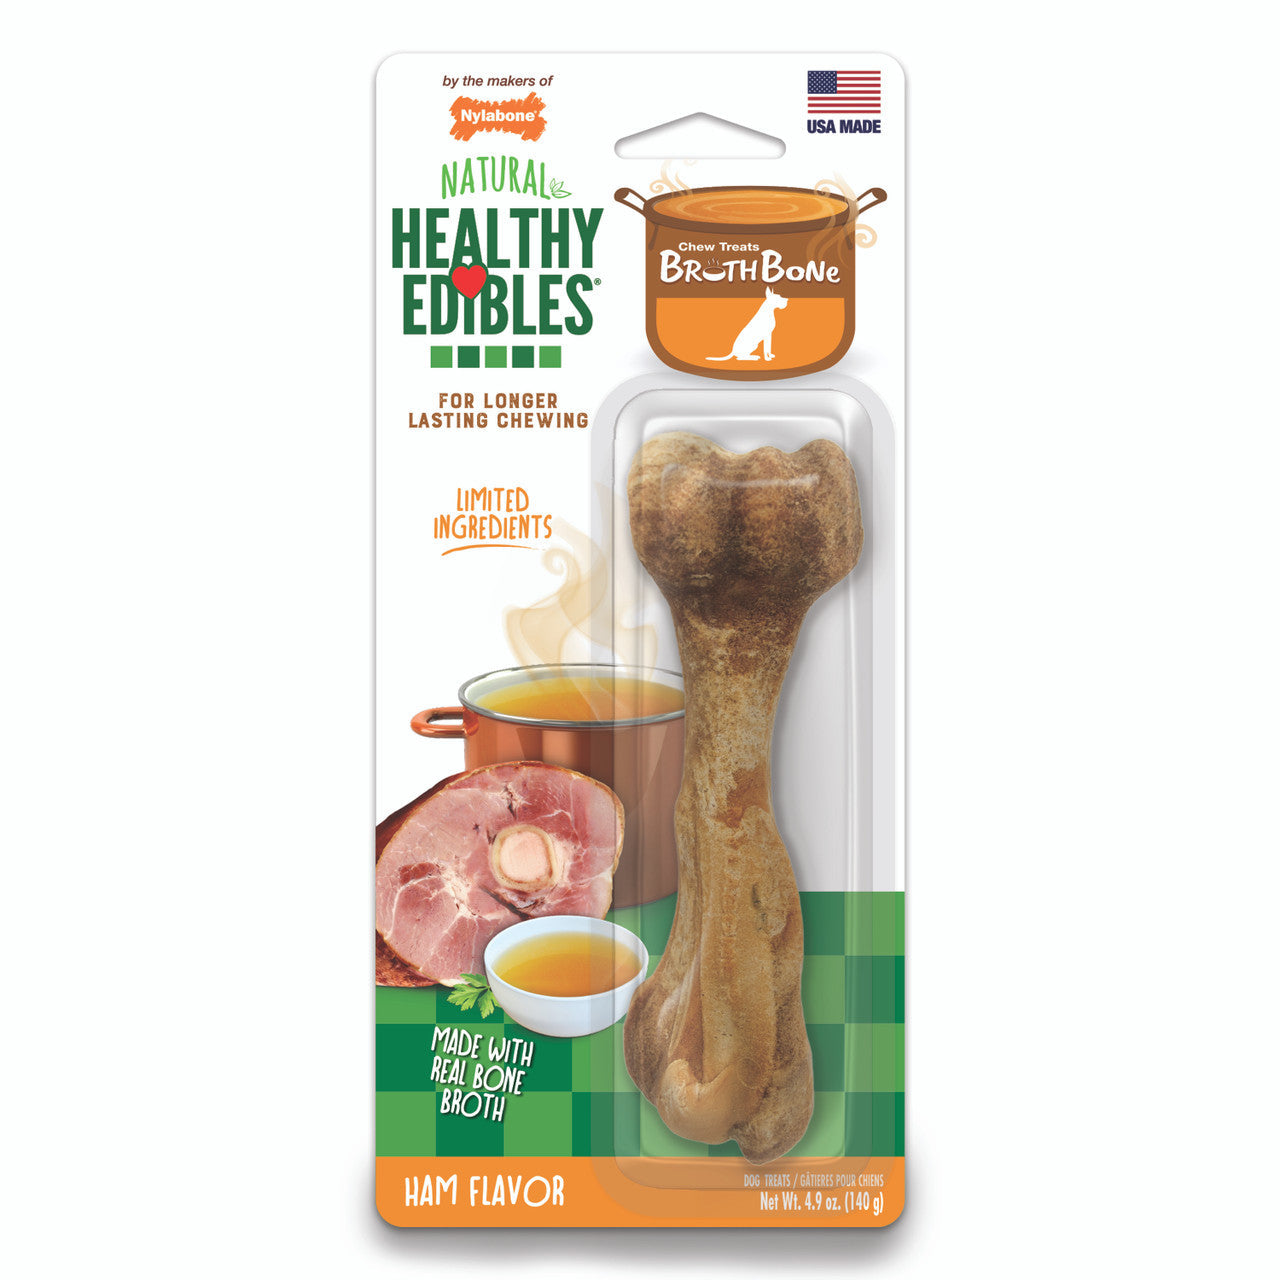 Nylabone Healthy Edibles Broth Bone All Natural Dog Treats Made With Real Bone Broth 1 Count Giant - Up to 50 lbs.